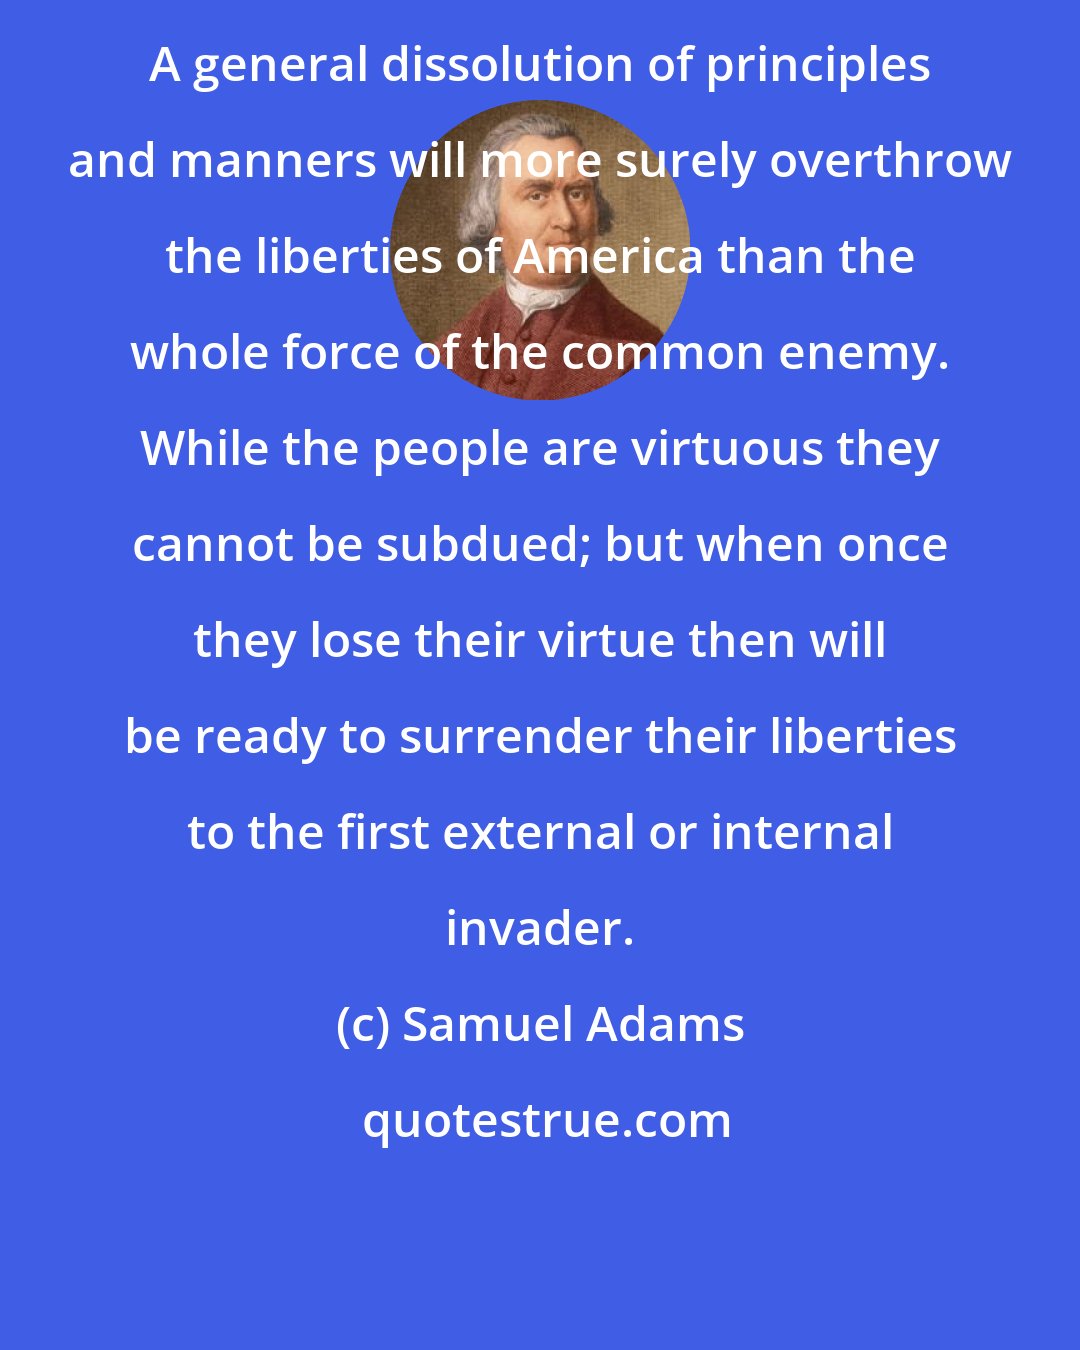 Samuel Adams: A general dissolution of principles and manners will more surely overthrow the liberties of America than the whole force of the common enemy. While the people are virtuous they cannot be subdued; but when once they lose their virtue then will be ready to surrender their liberties to the first external or internal invader.